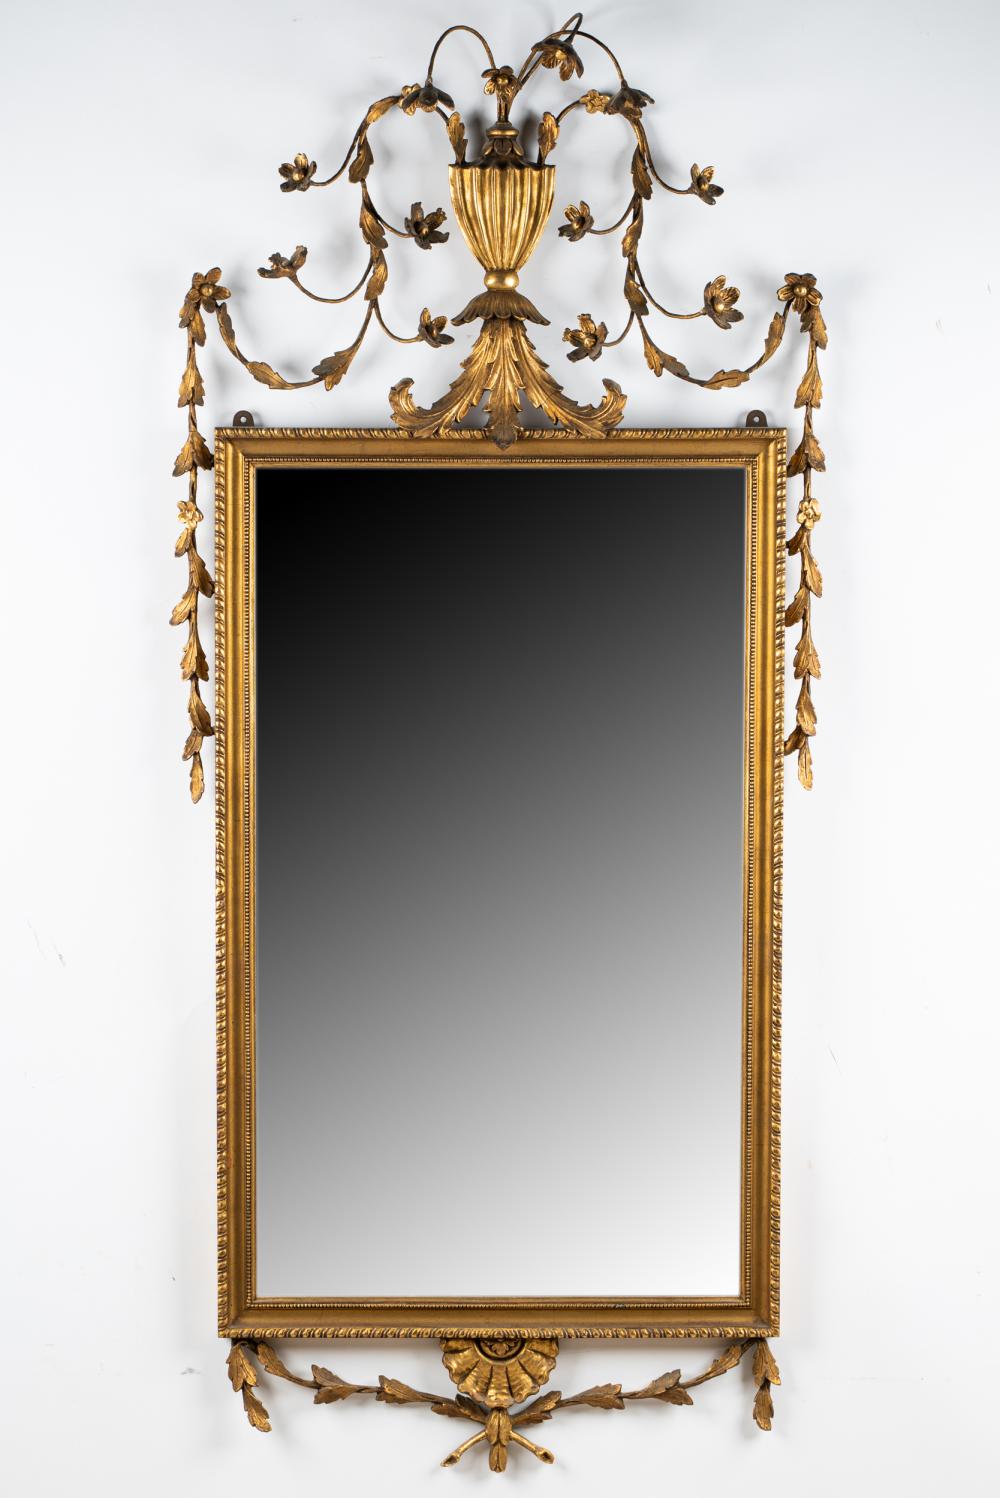 GEORGIAN STYLE GILTWOOD MIRRORCondition: